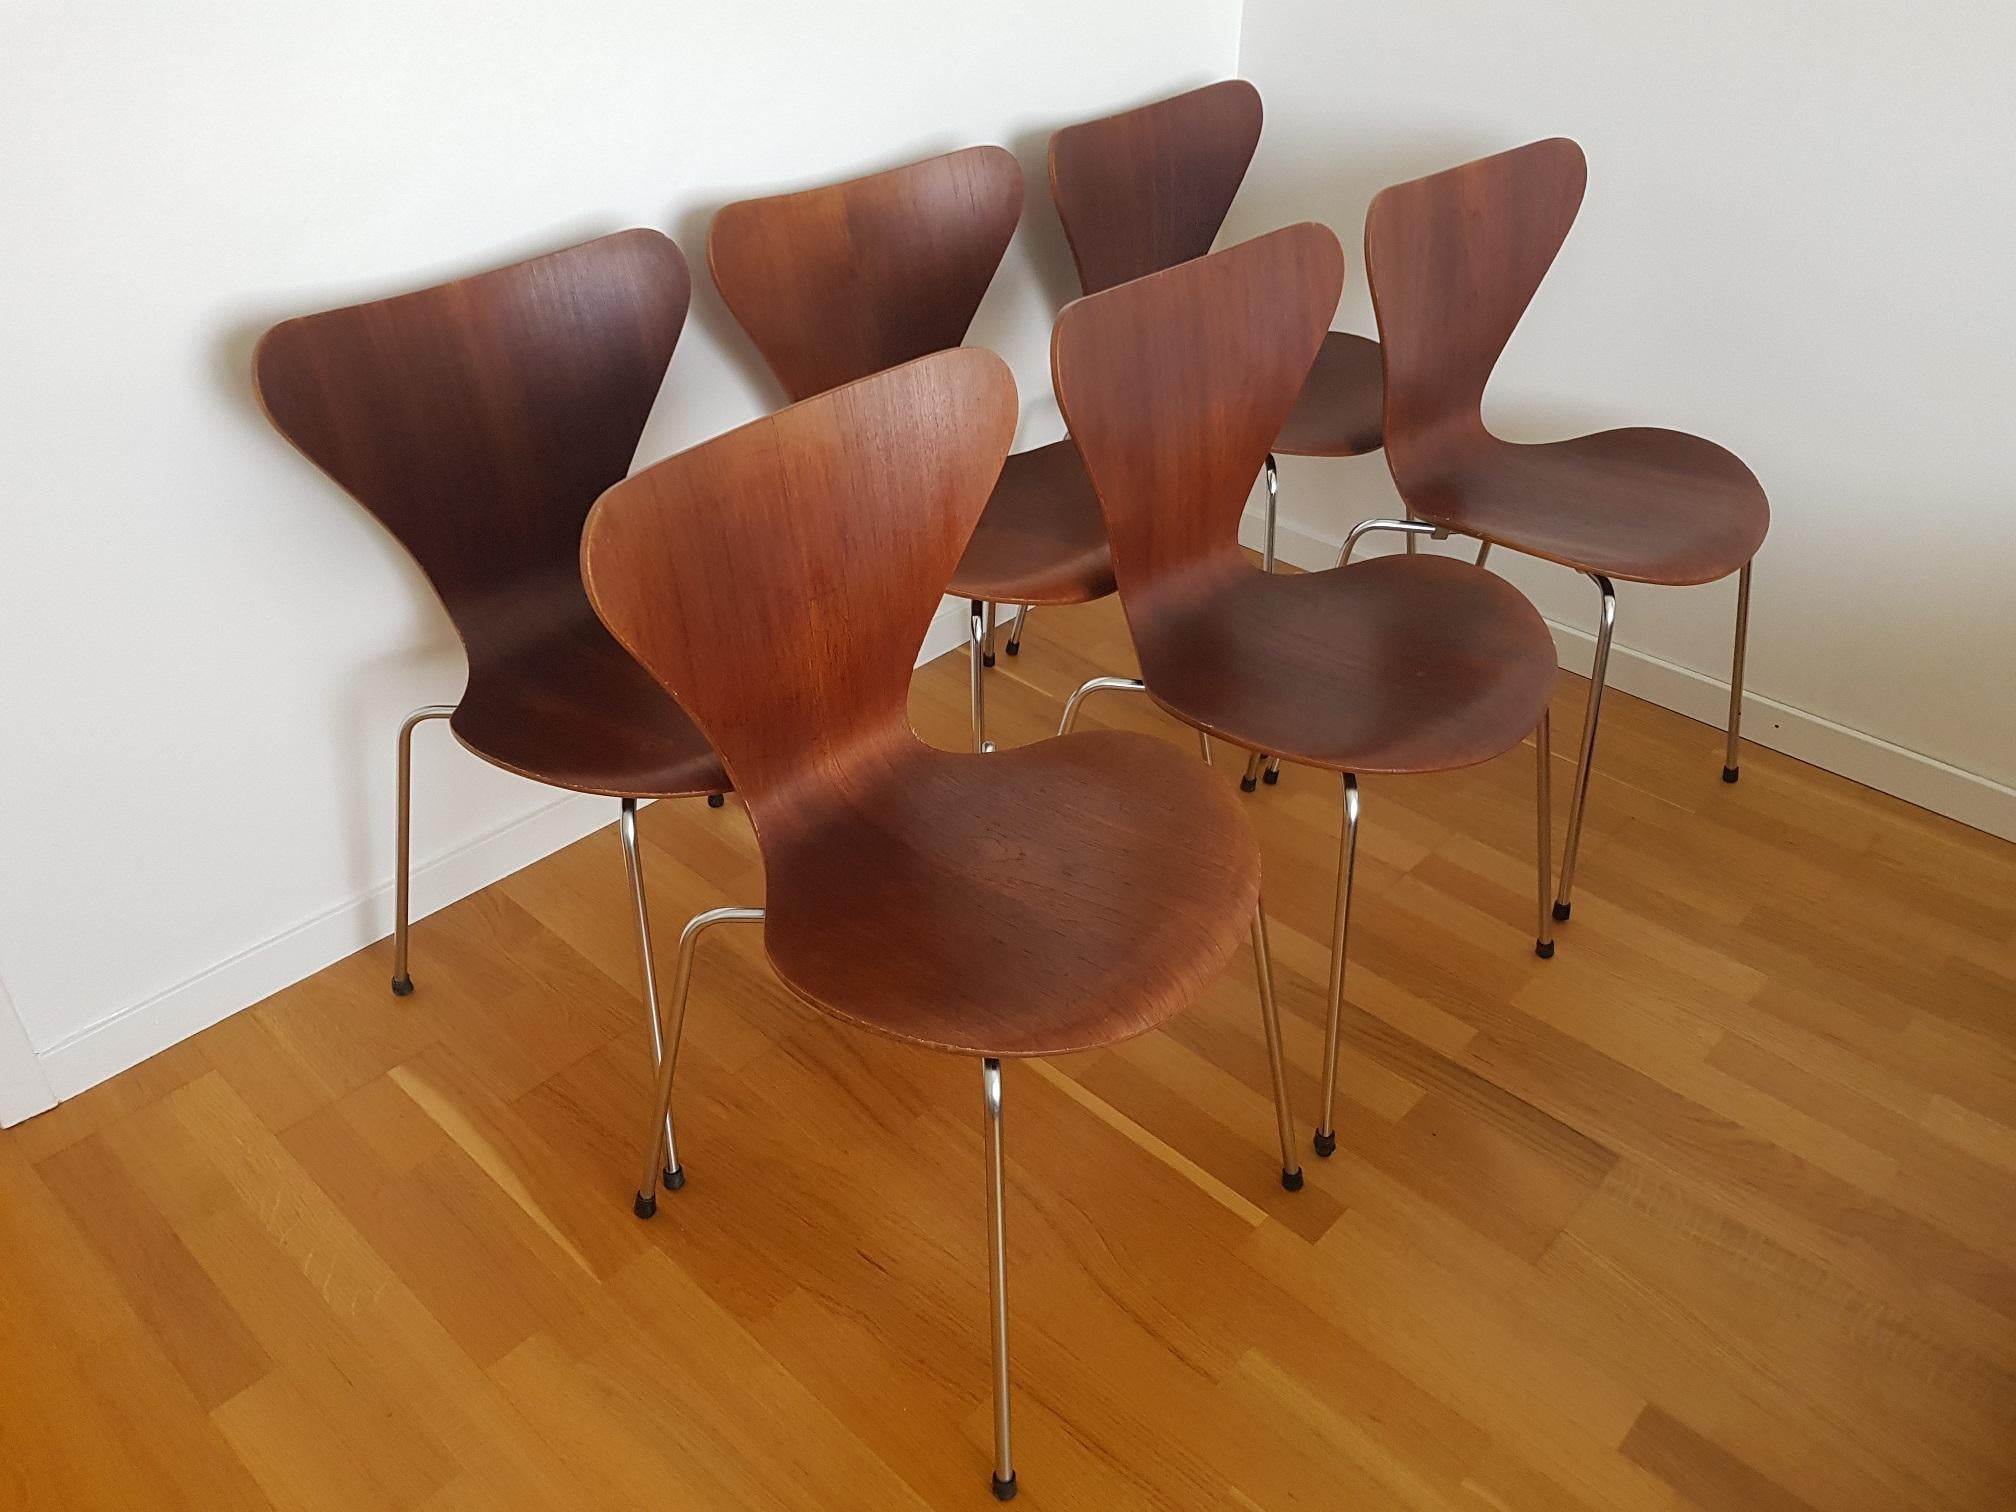 6 Vintage Series 7 Chairs 3107 in Teak 1960s by Arne Jacobsen for Fritz Hansen In Good Condition For Sale In Limhamn, SE